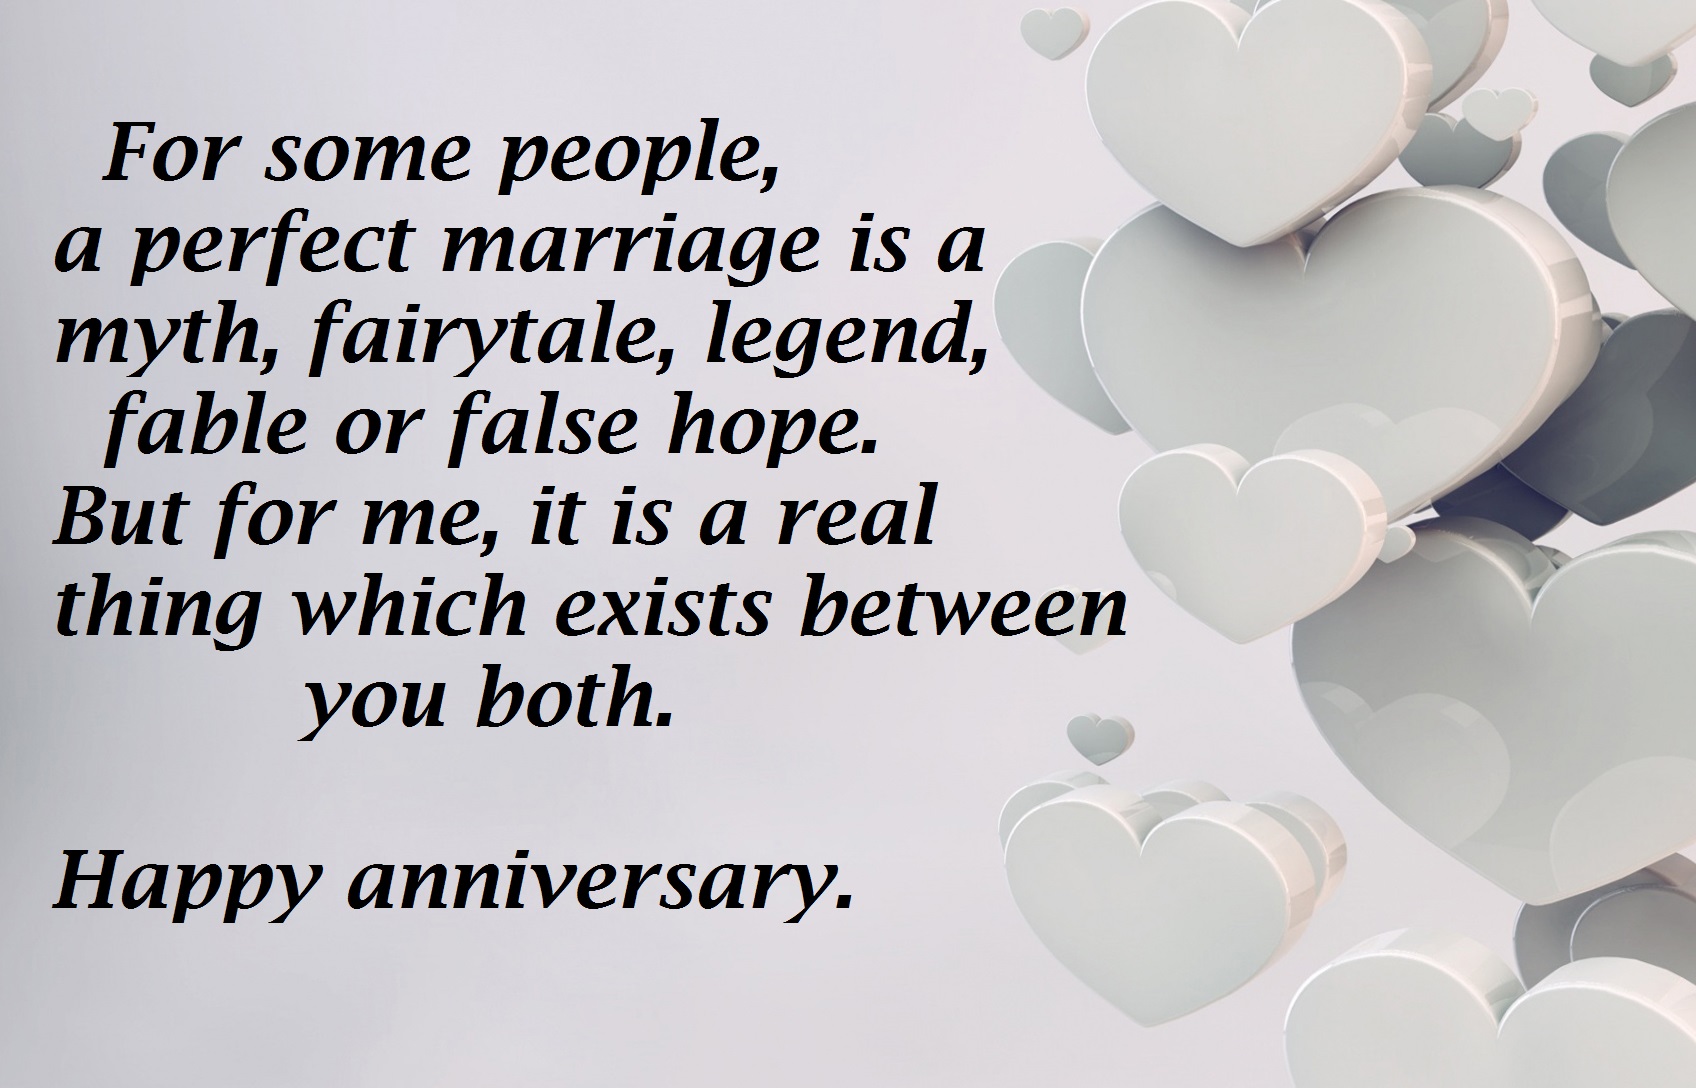 image for anniversary quotes